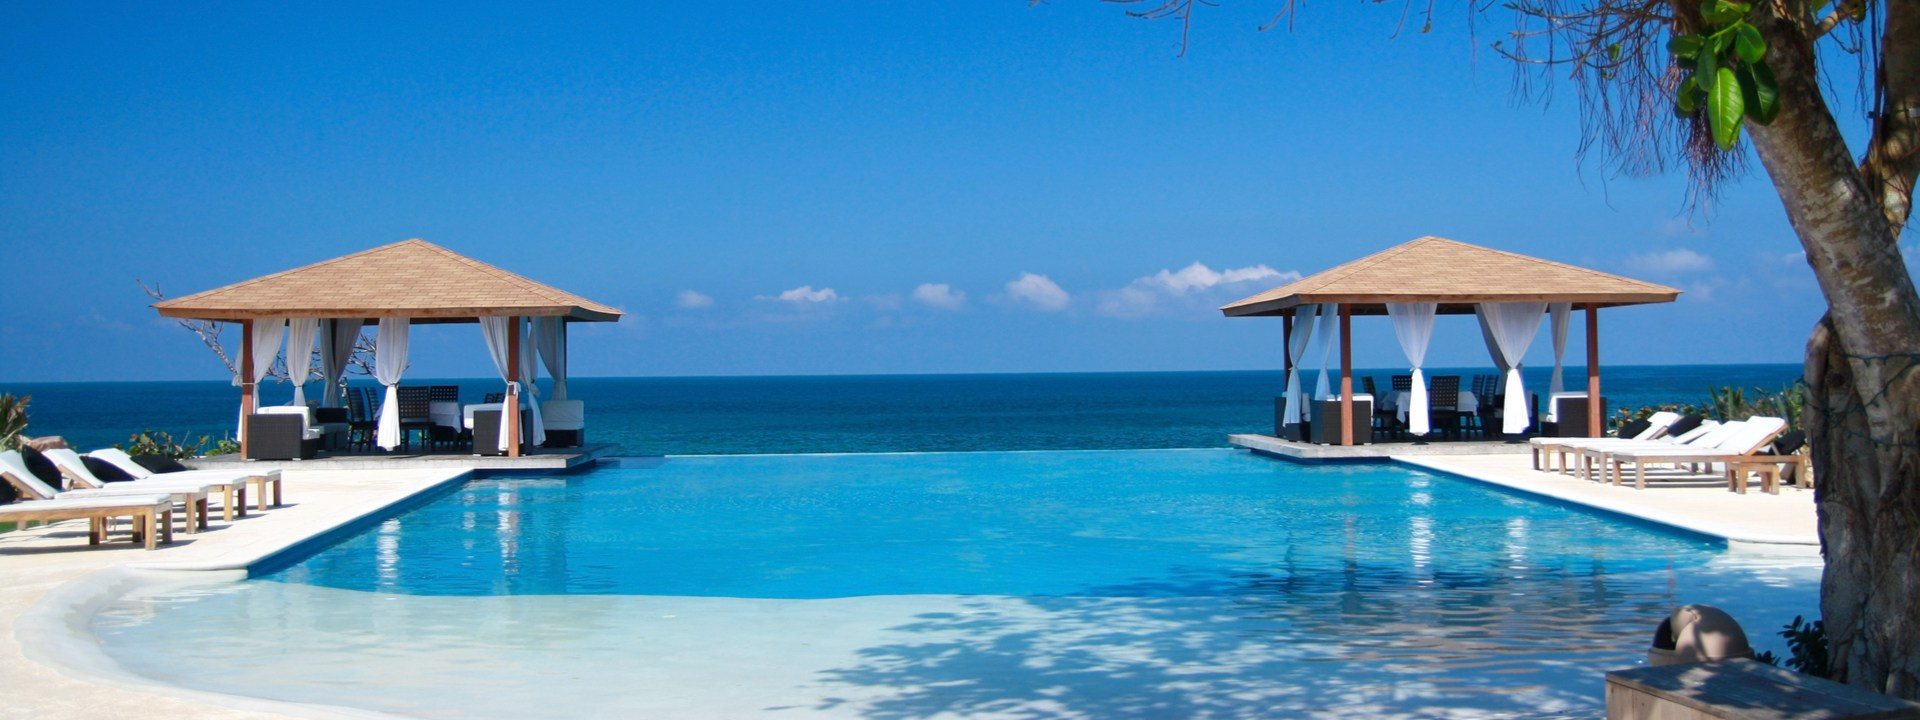 Discover the Best Places to Stay in The Dominican Republic